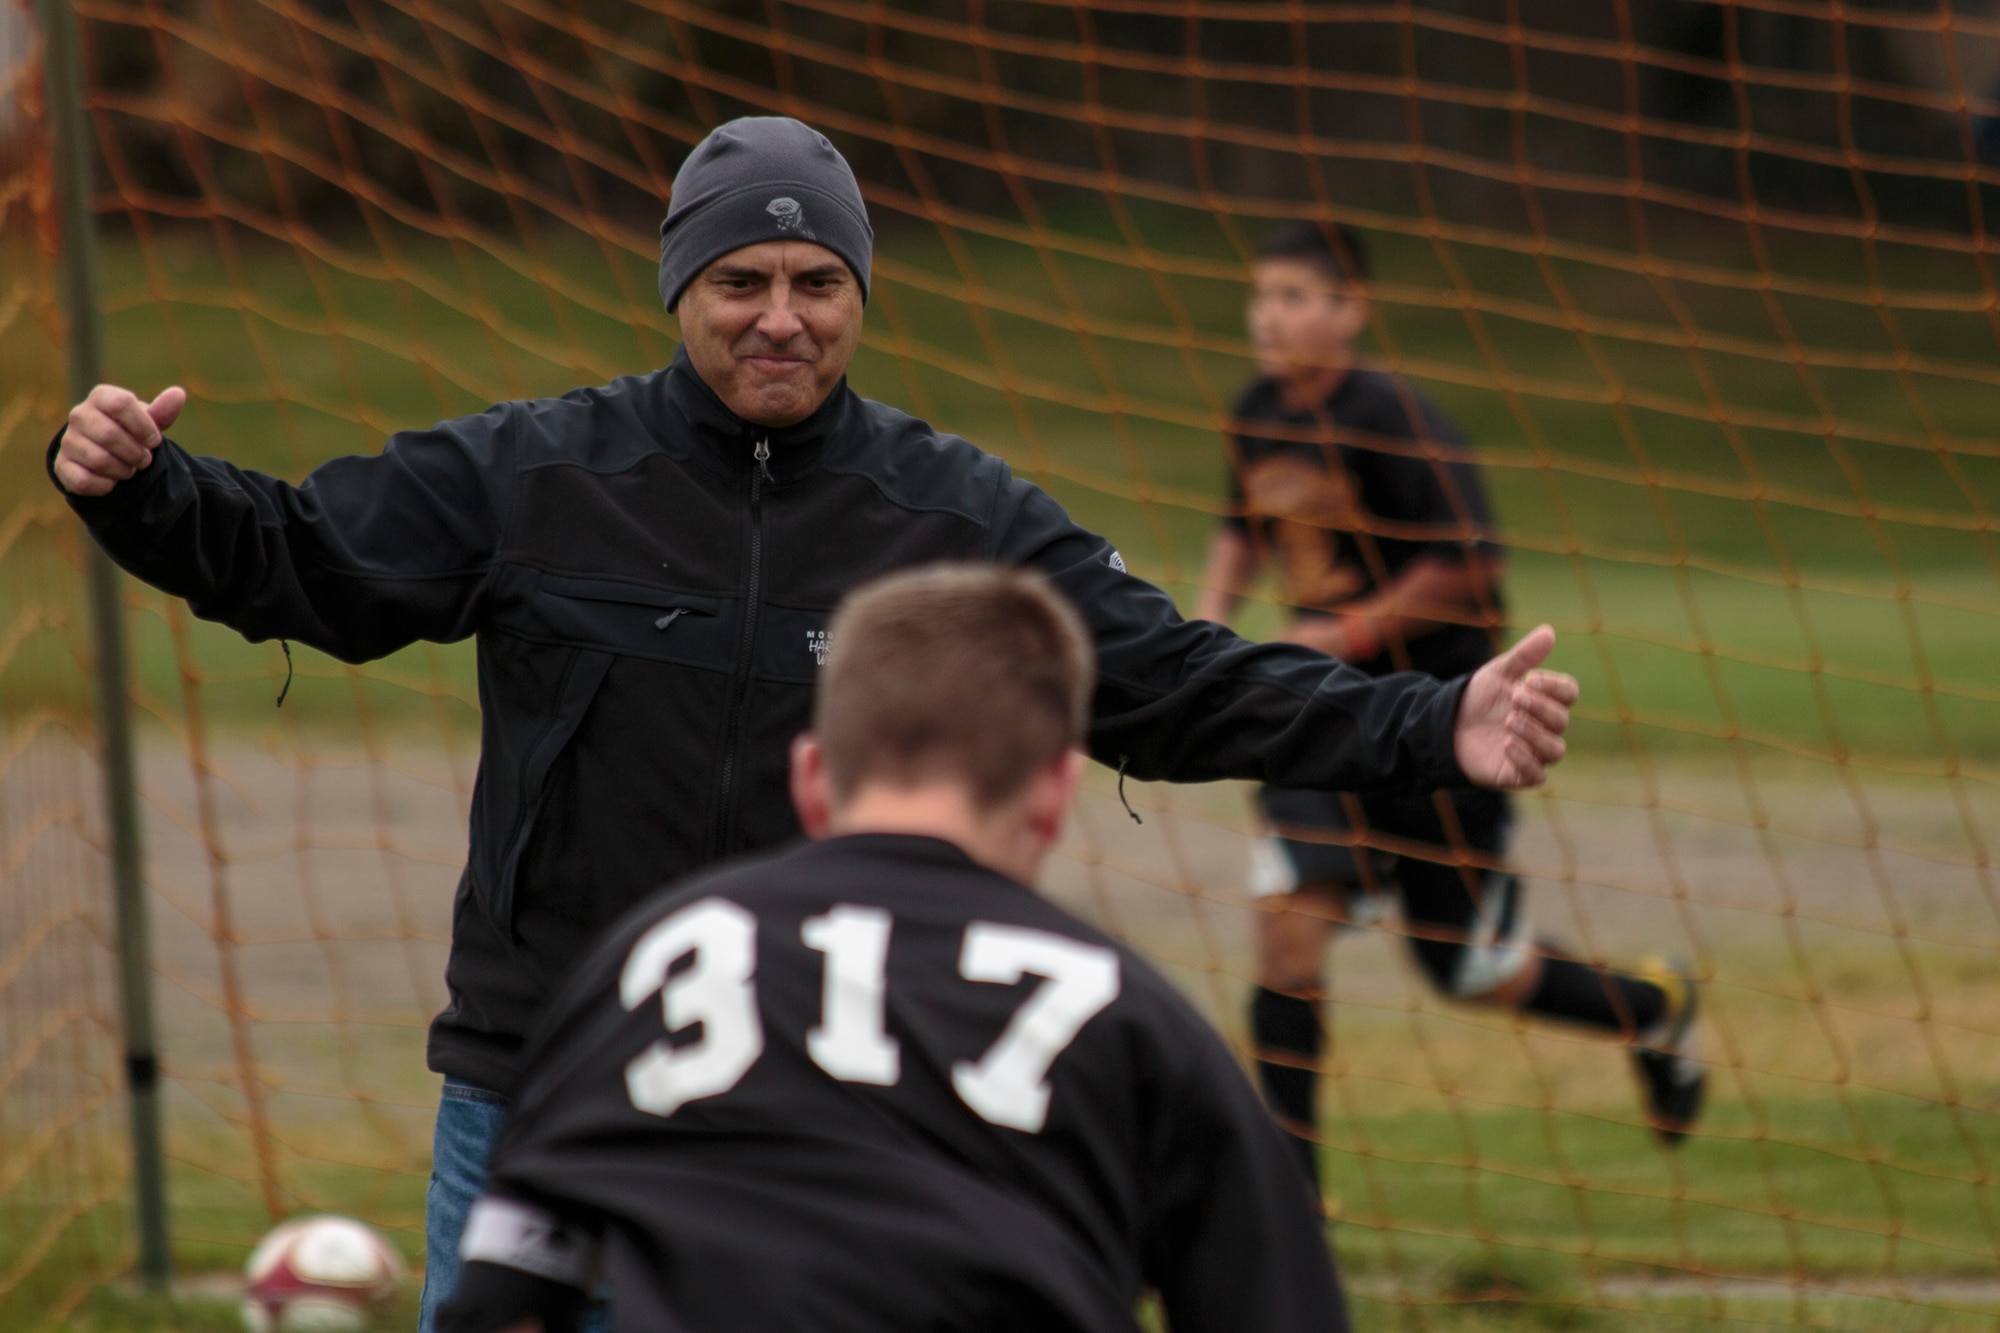 Chaplain (Maj.) Pierre Allegre, 446th Airlift Wing chaplain, coaches boys and girls' soccer for a middle school in Lacey, Wash., Oct. 30. Allegre used to play soccer in high school and is one of his passions in his civilian life. He's also a pastor for a church in Lacey. He said Veterans' Day is a reminder of why he puts on his Air Force uniform. (U.S. Air Force Reserve photo by Master Sgt. Jake Chappelle)